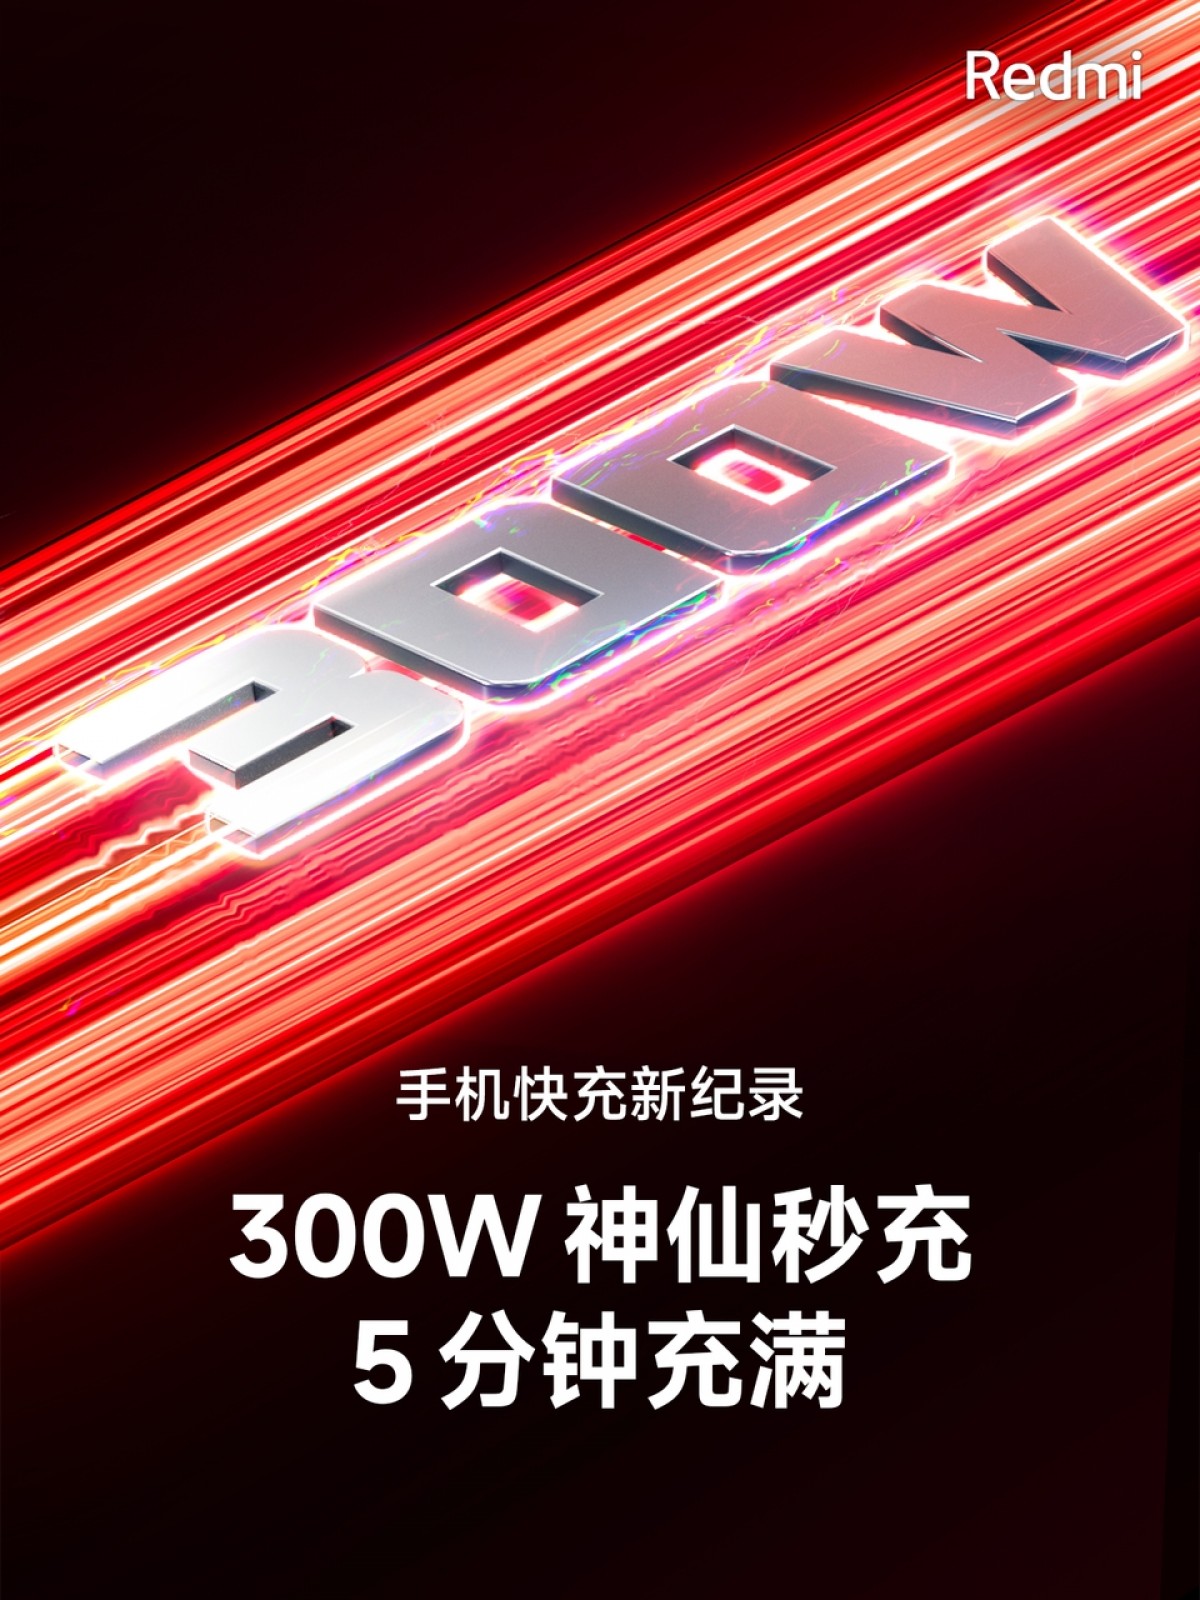 Redmi introduces 300W fast charging which fills a phone battery in 5 minutes